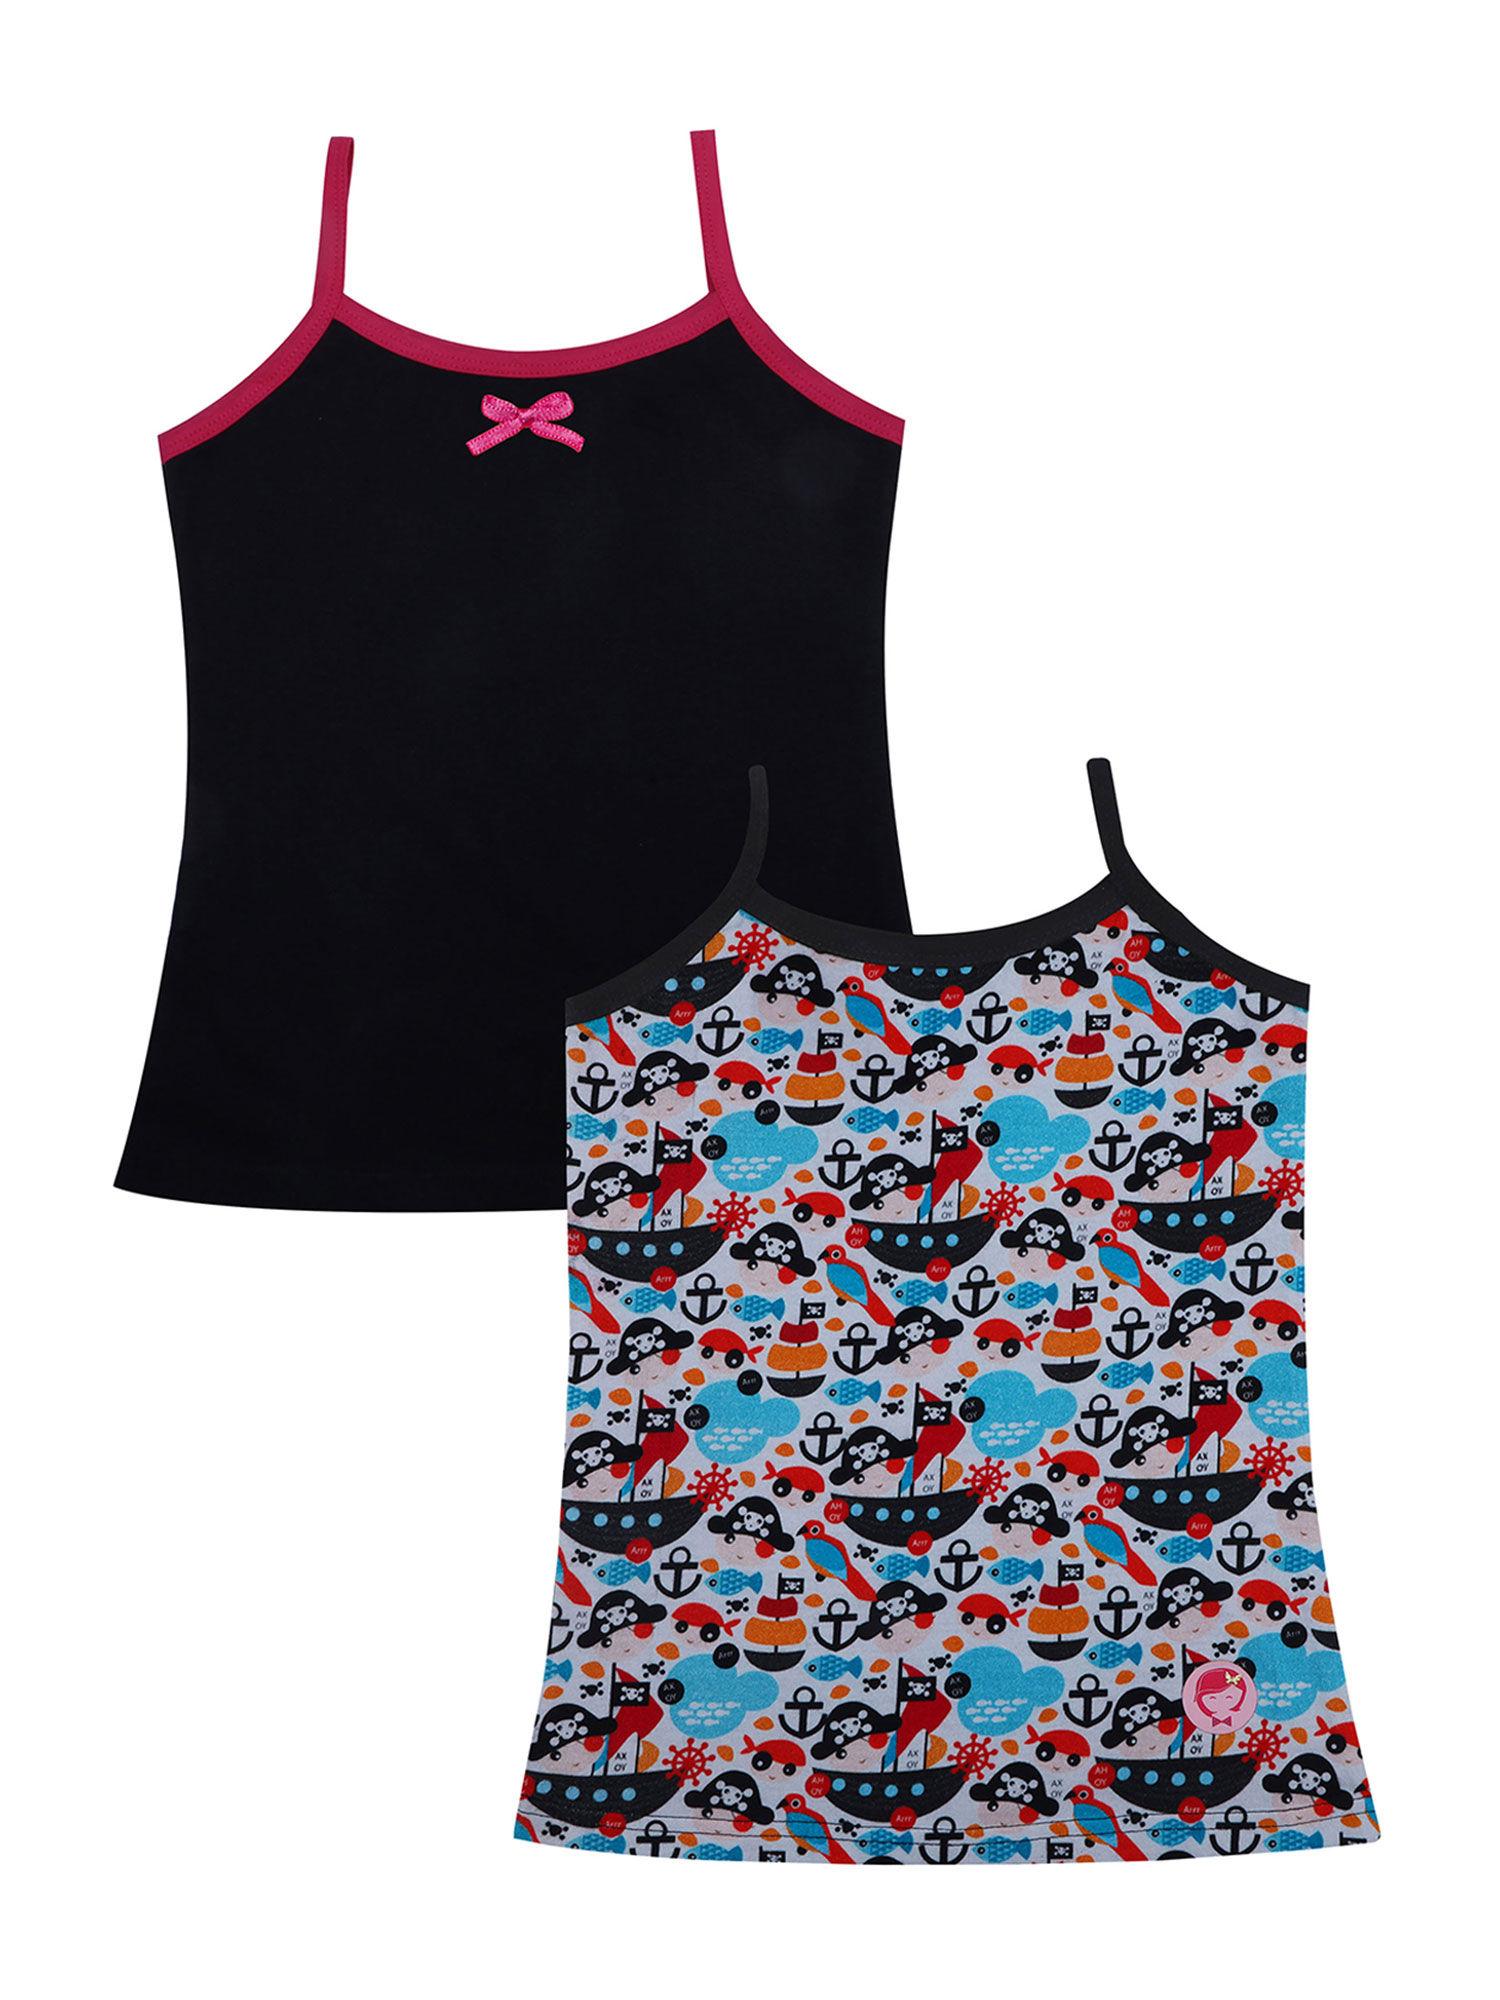 pirate printed & black coloured camisoles for girls (pack of 2)